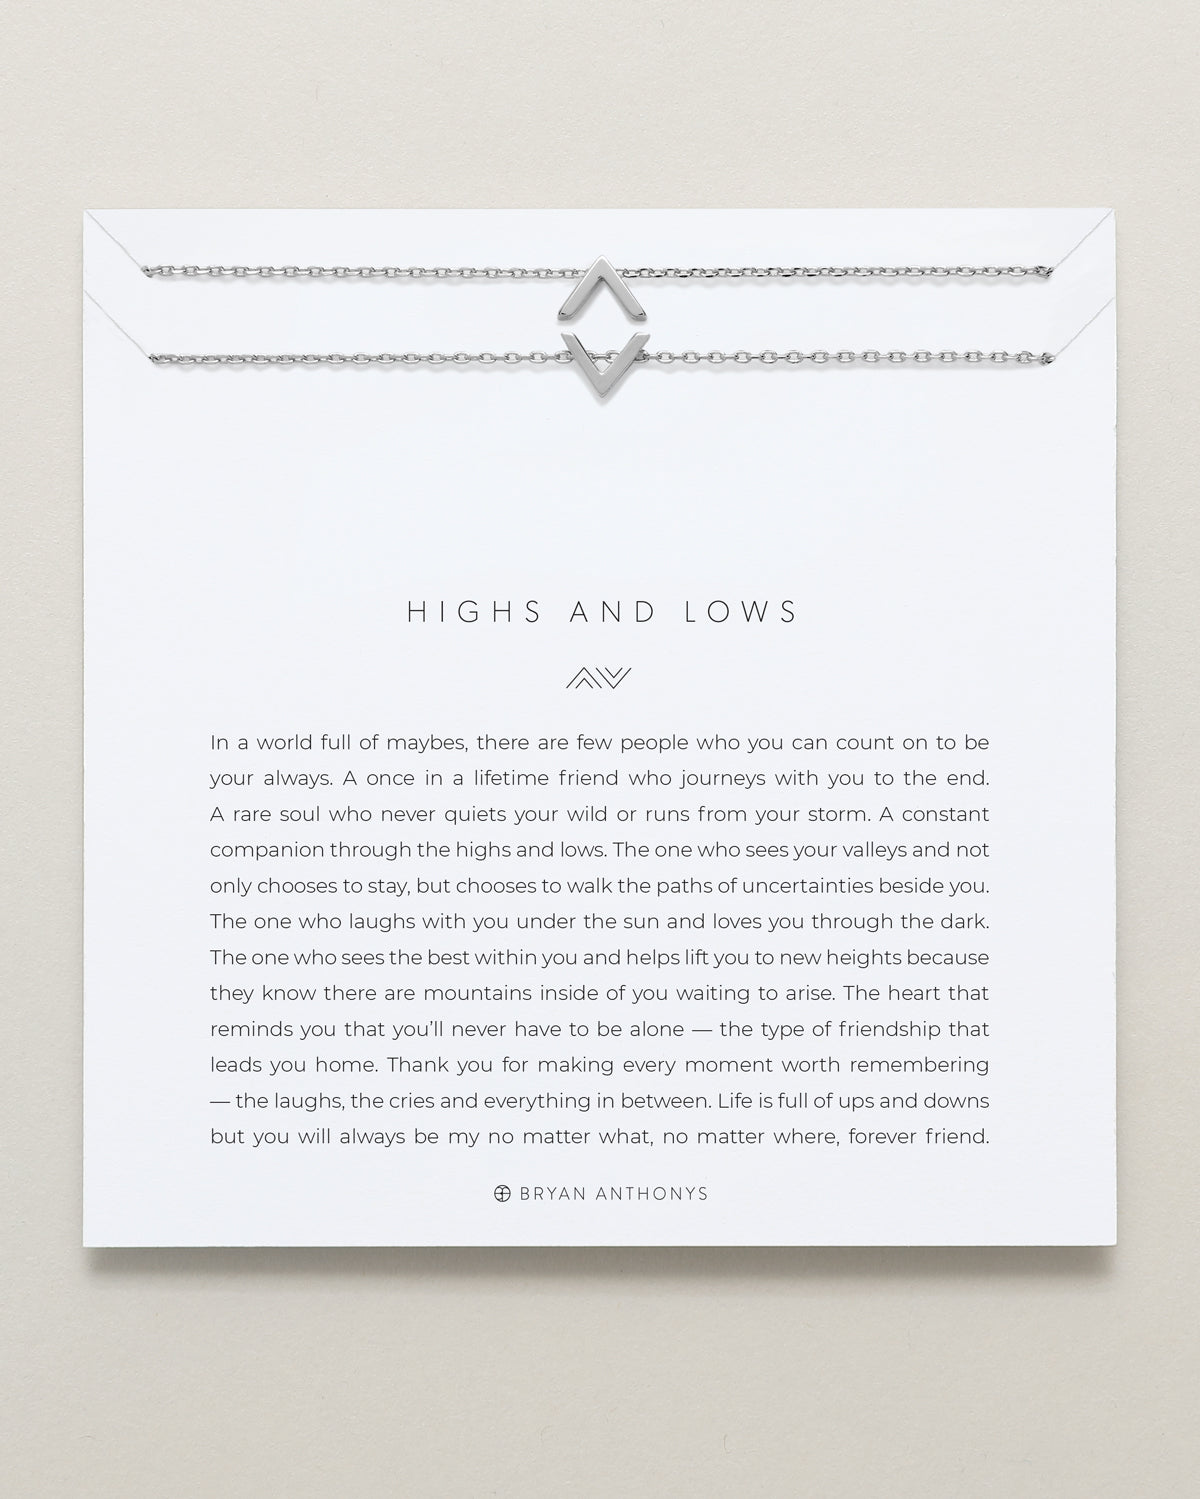 Bryan Anthonys Highs and Lows Silver Necklace Set On Card